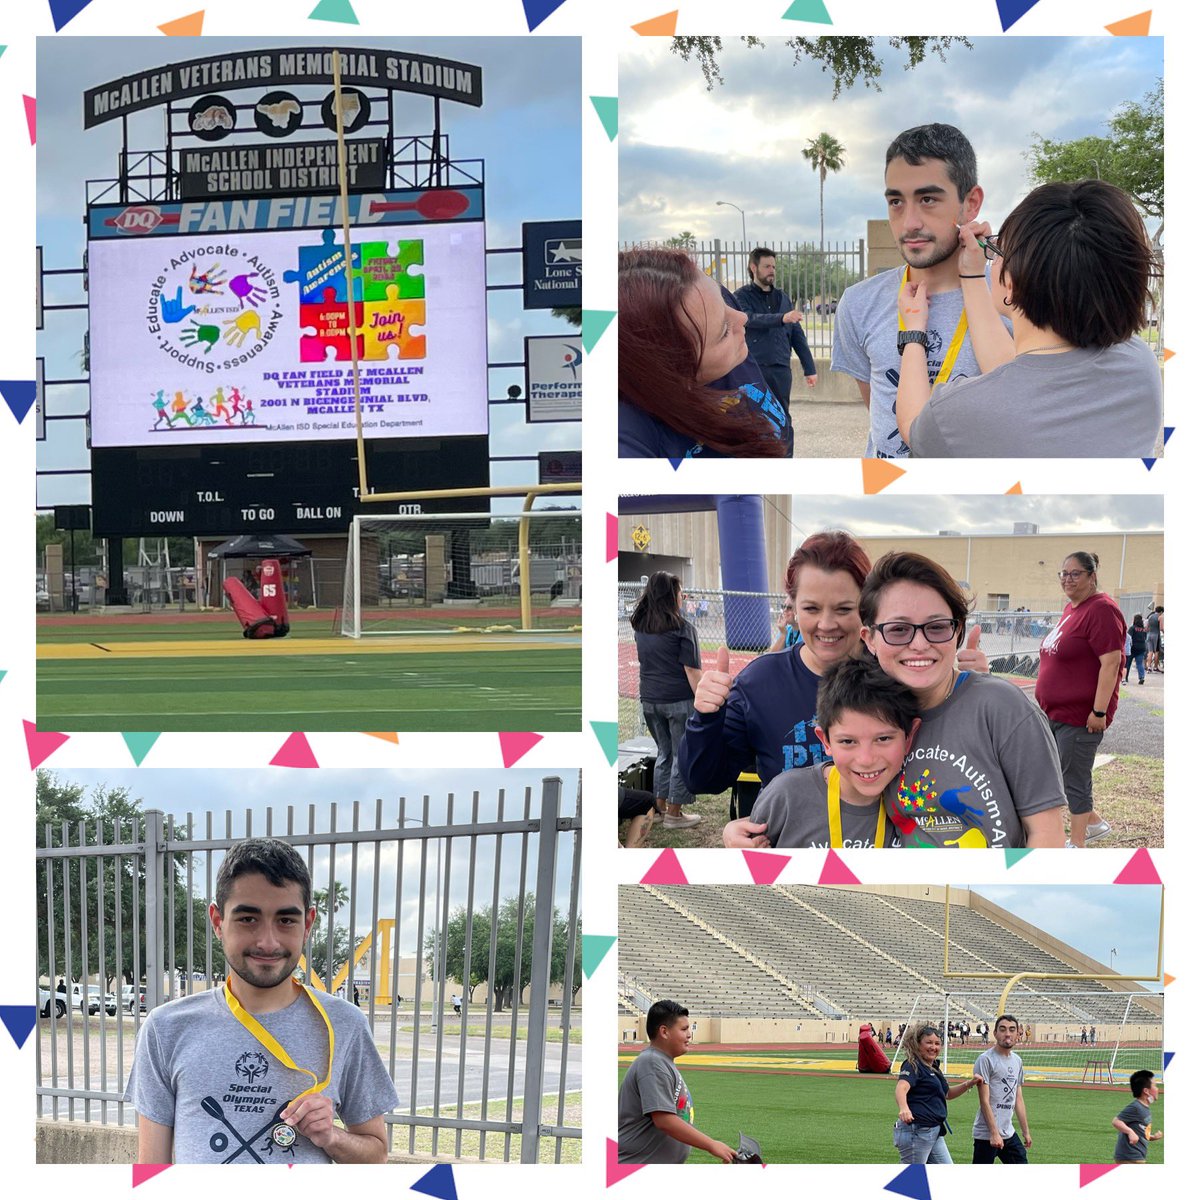 What a great evening at the Autism Awareness Walk! #austimawareness #deafed @sped_misd @McAllenISD